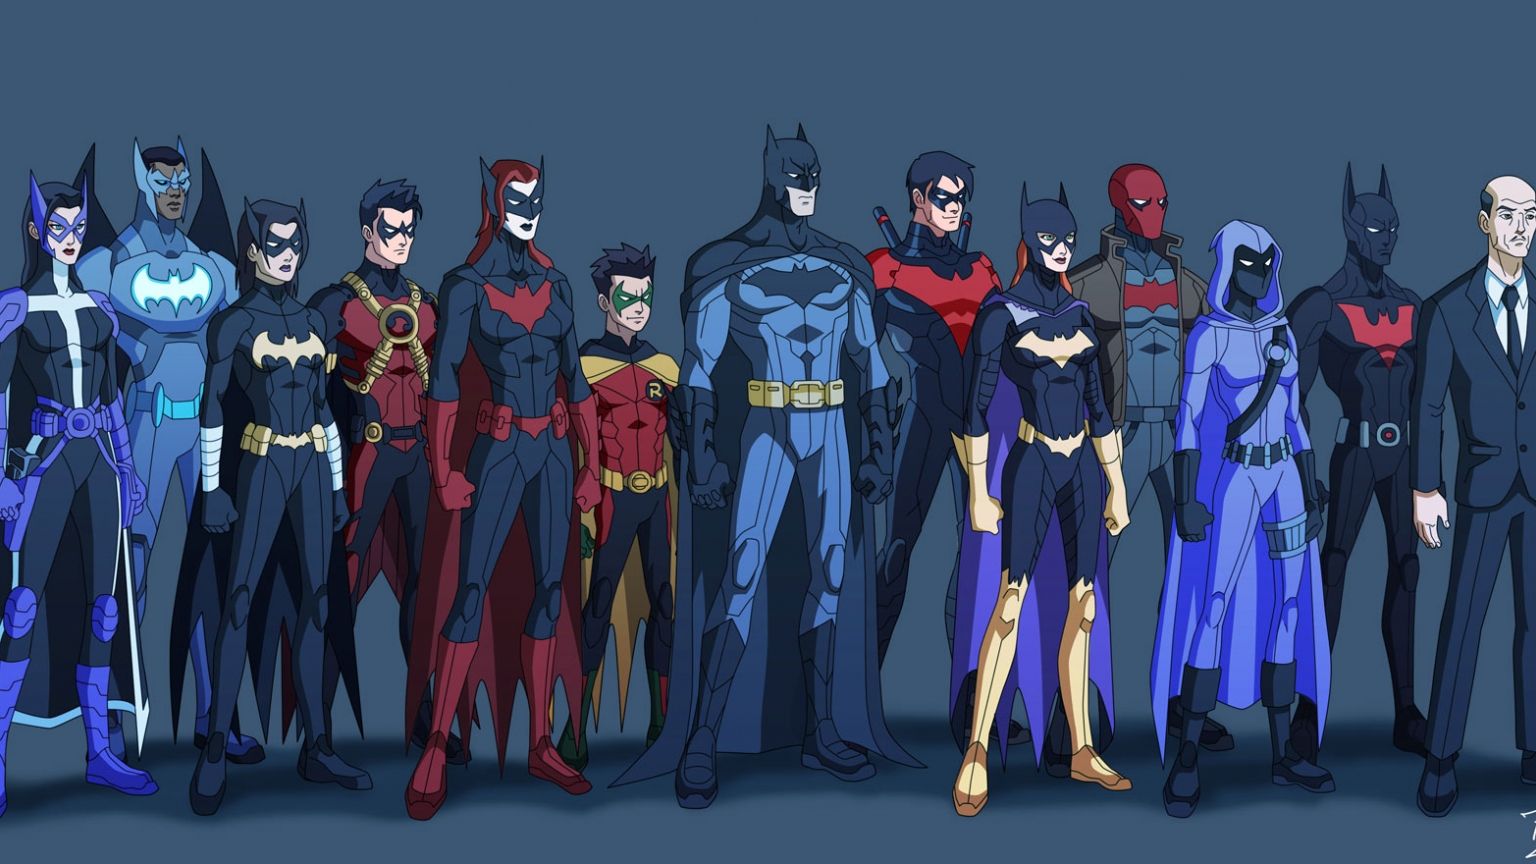 Free download Batman Bat Family Wallpaper - in Collection